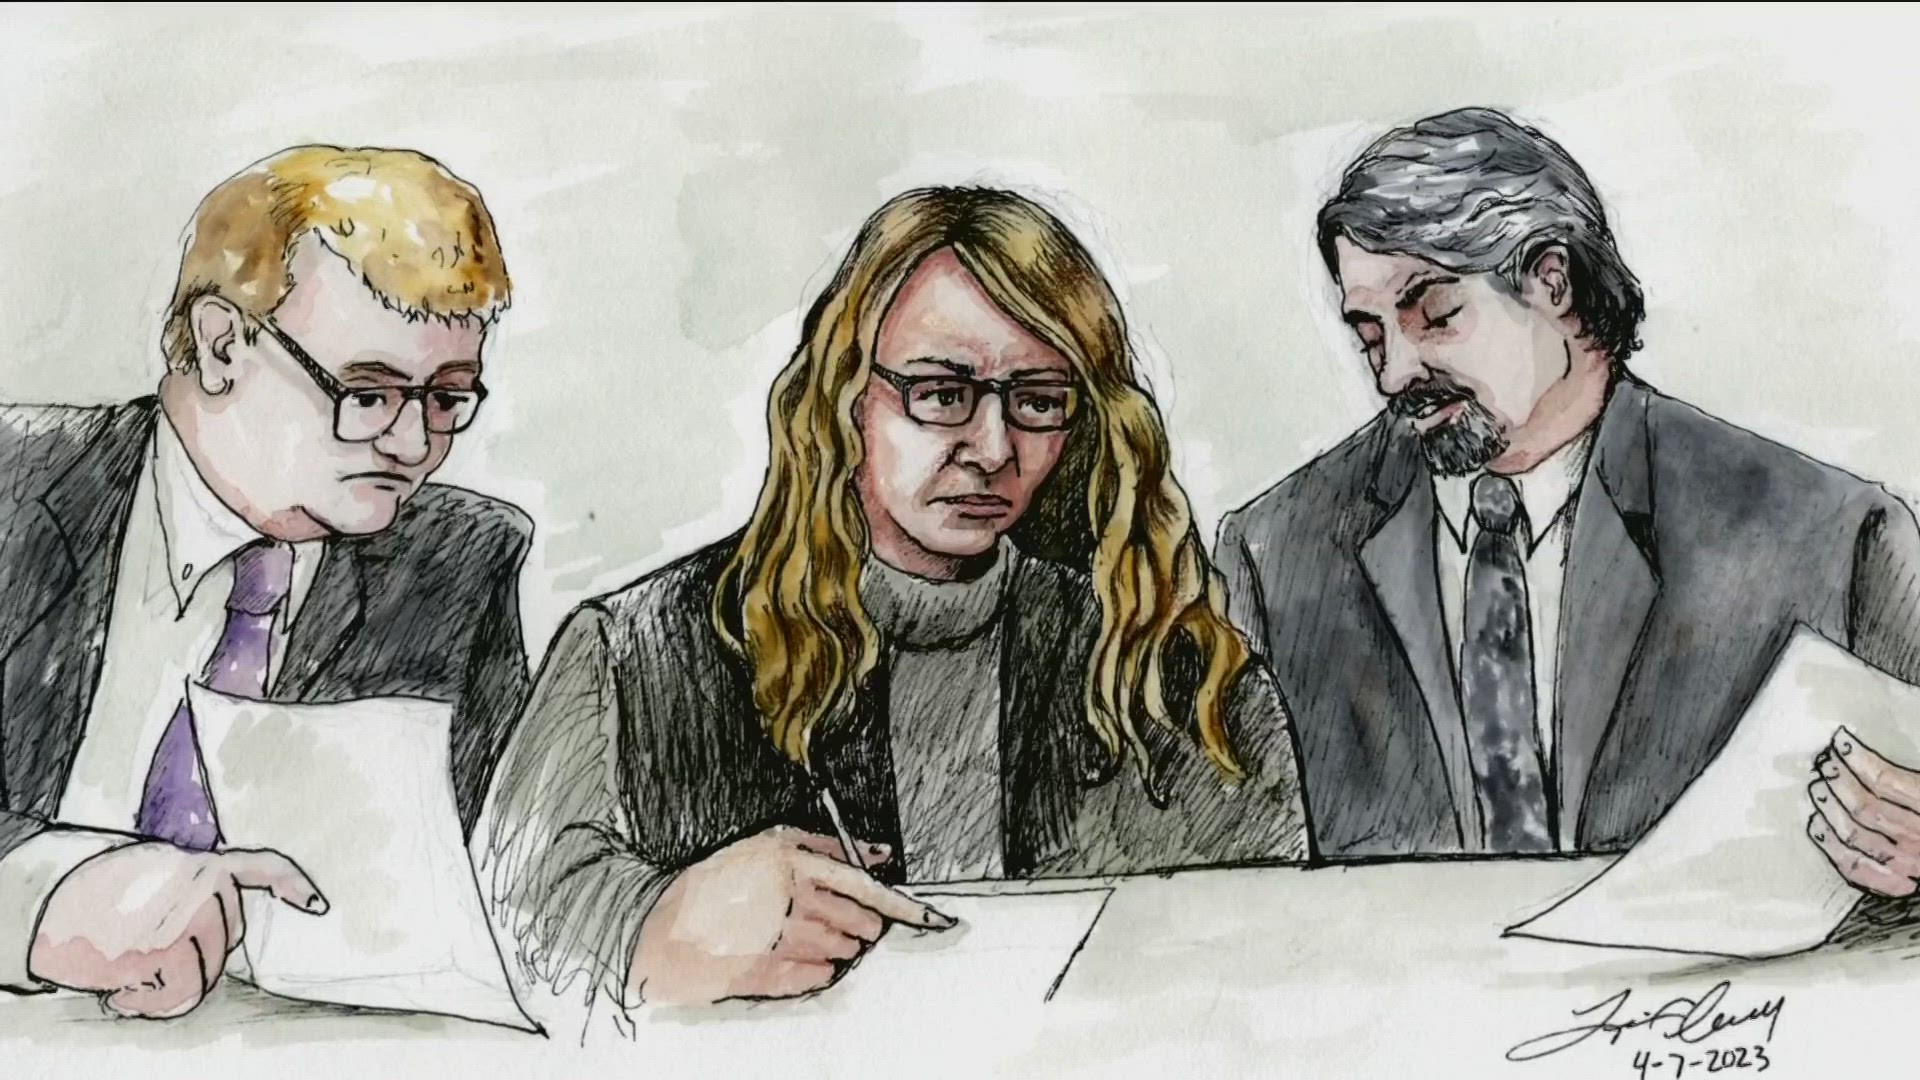 Boise resident and trial sketch artist for the Lori Vallow Daybell trial, Lisa Cheney, explains the difficult task of providing daily visuals without cameras.